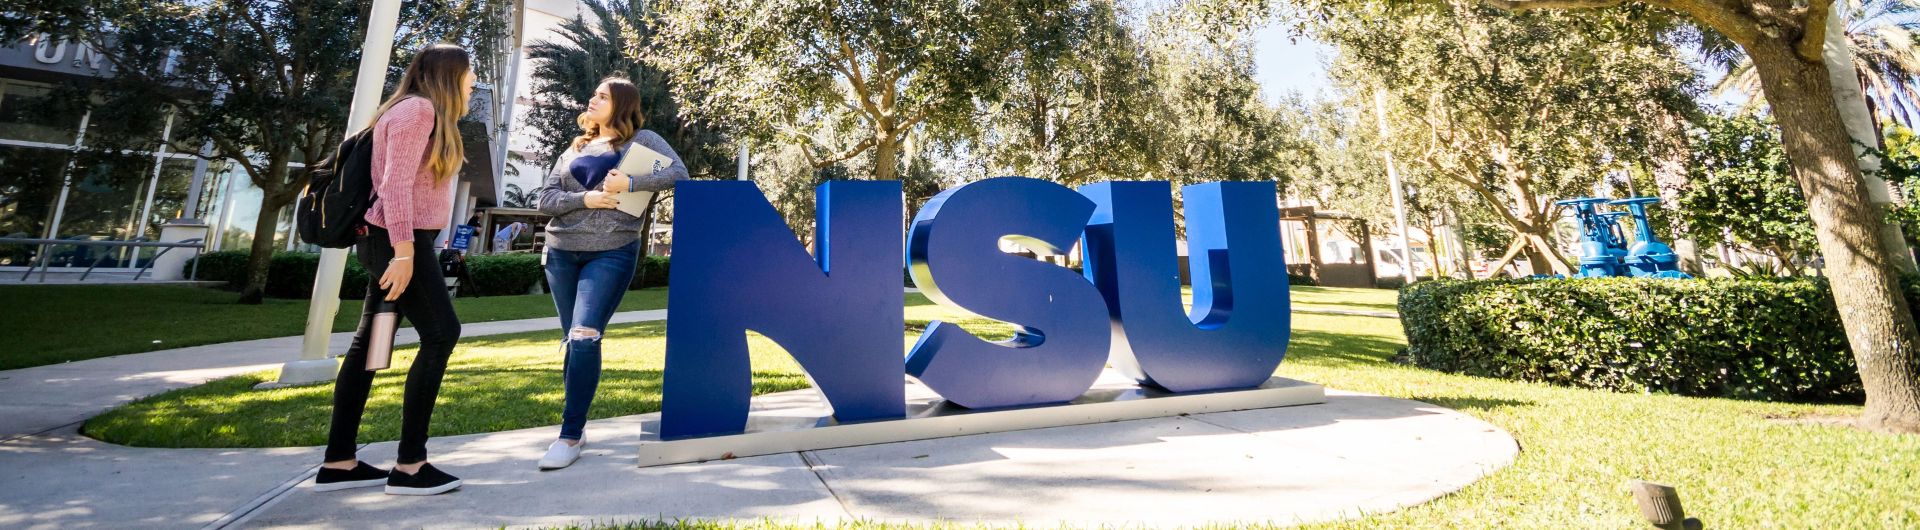 students and nsu letters